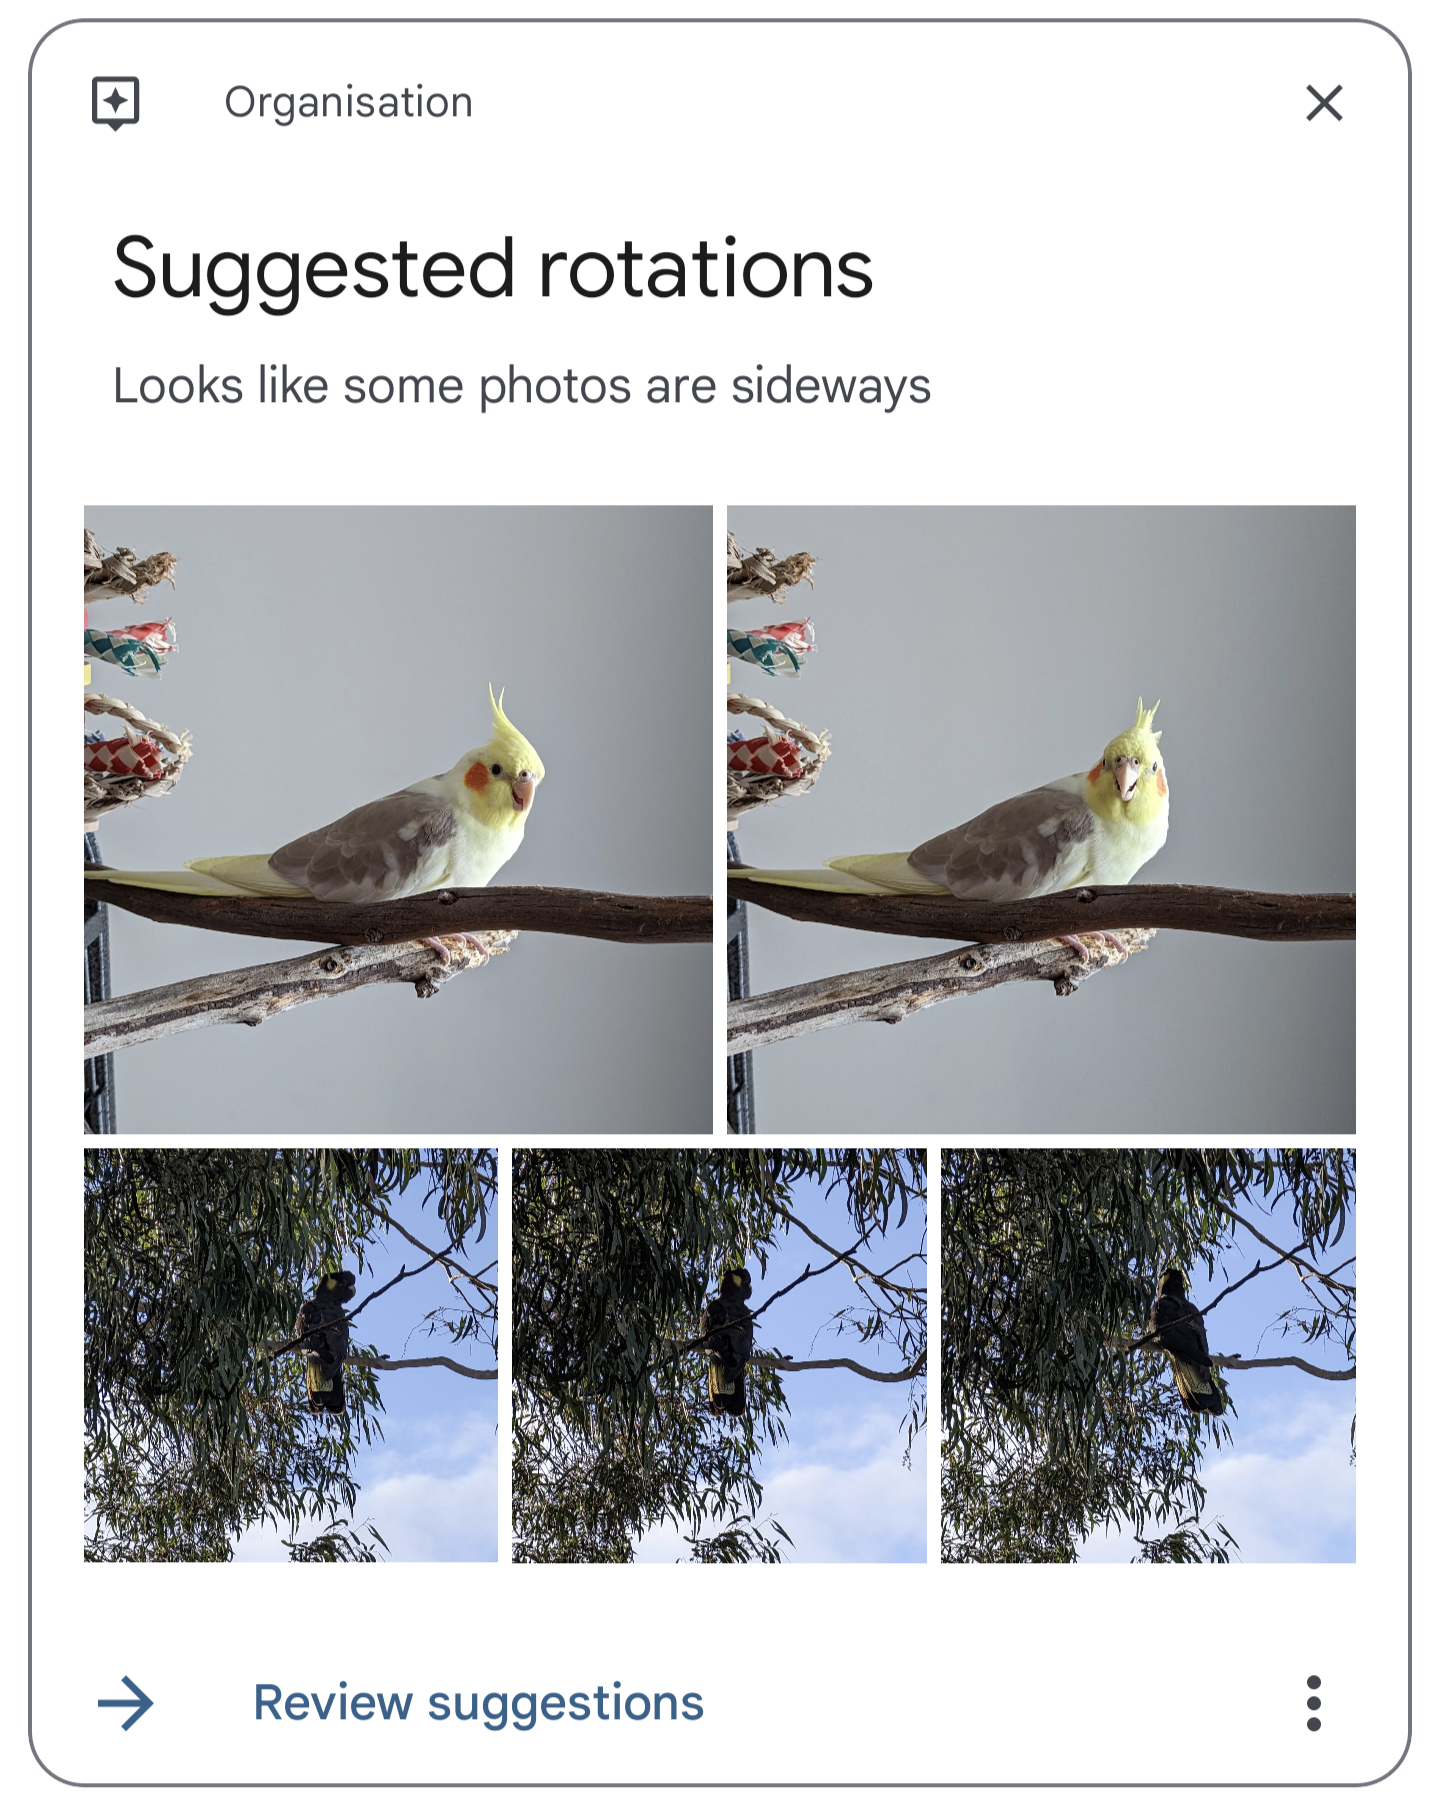 Suggestion to rotate photos of birds